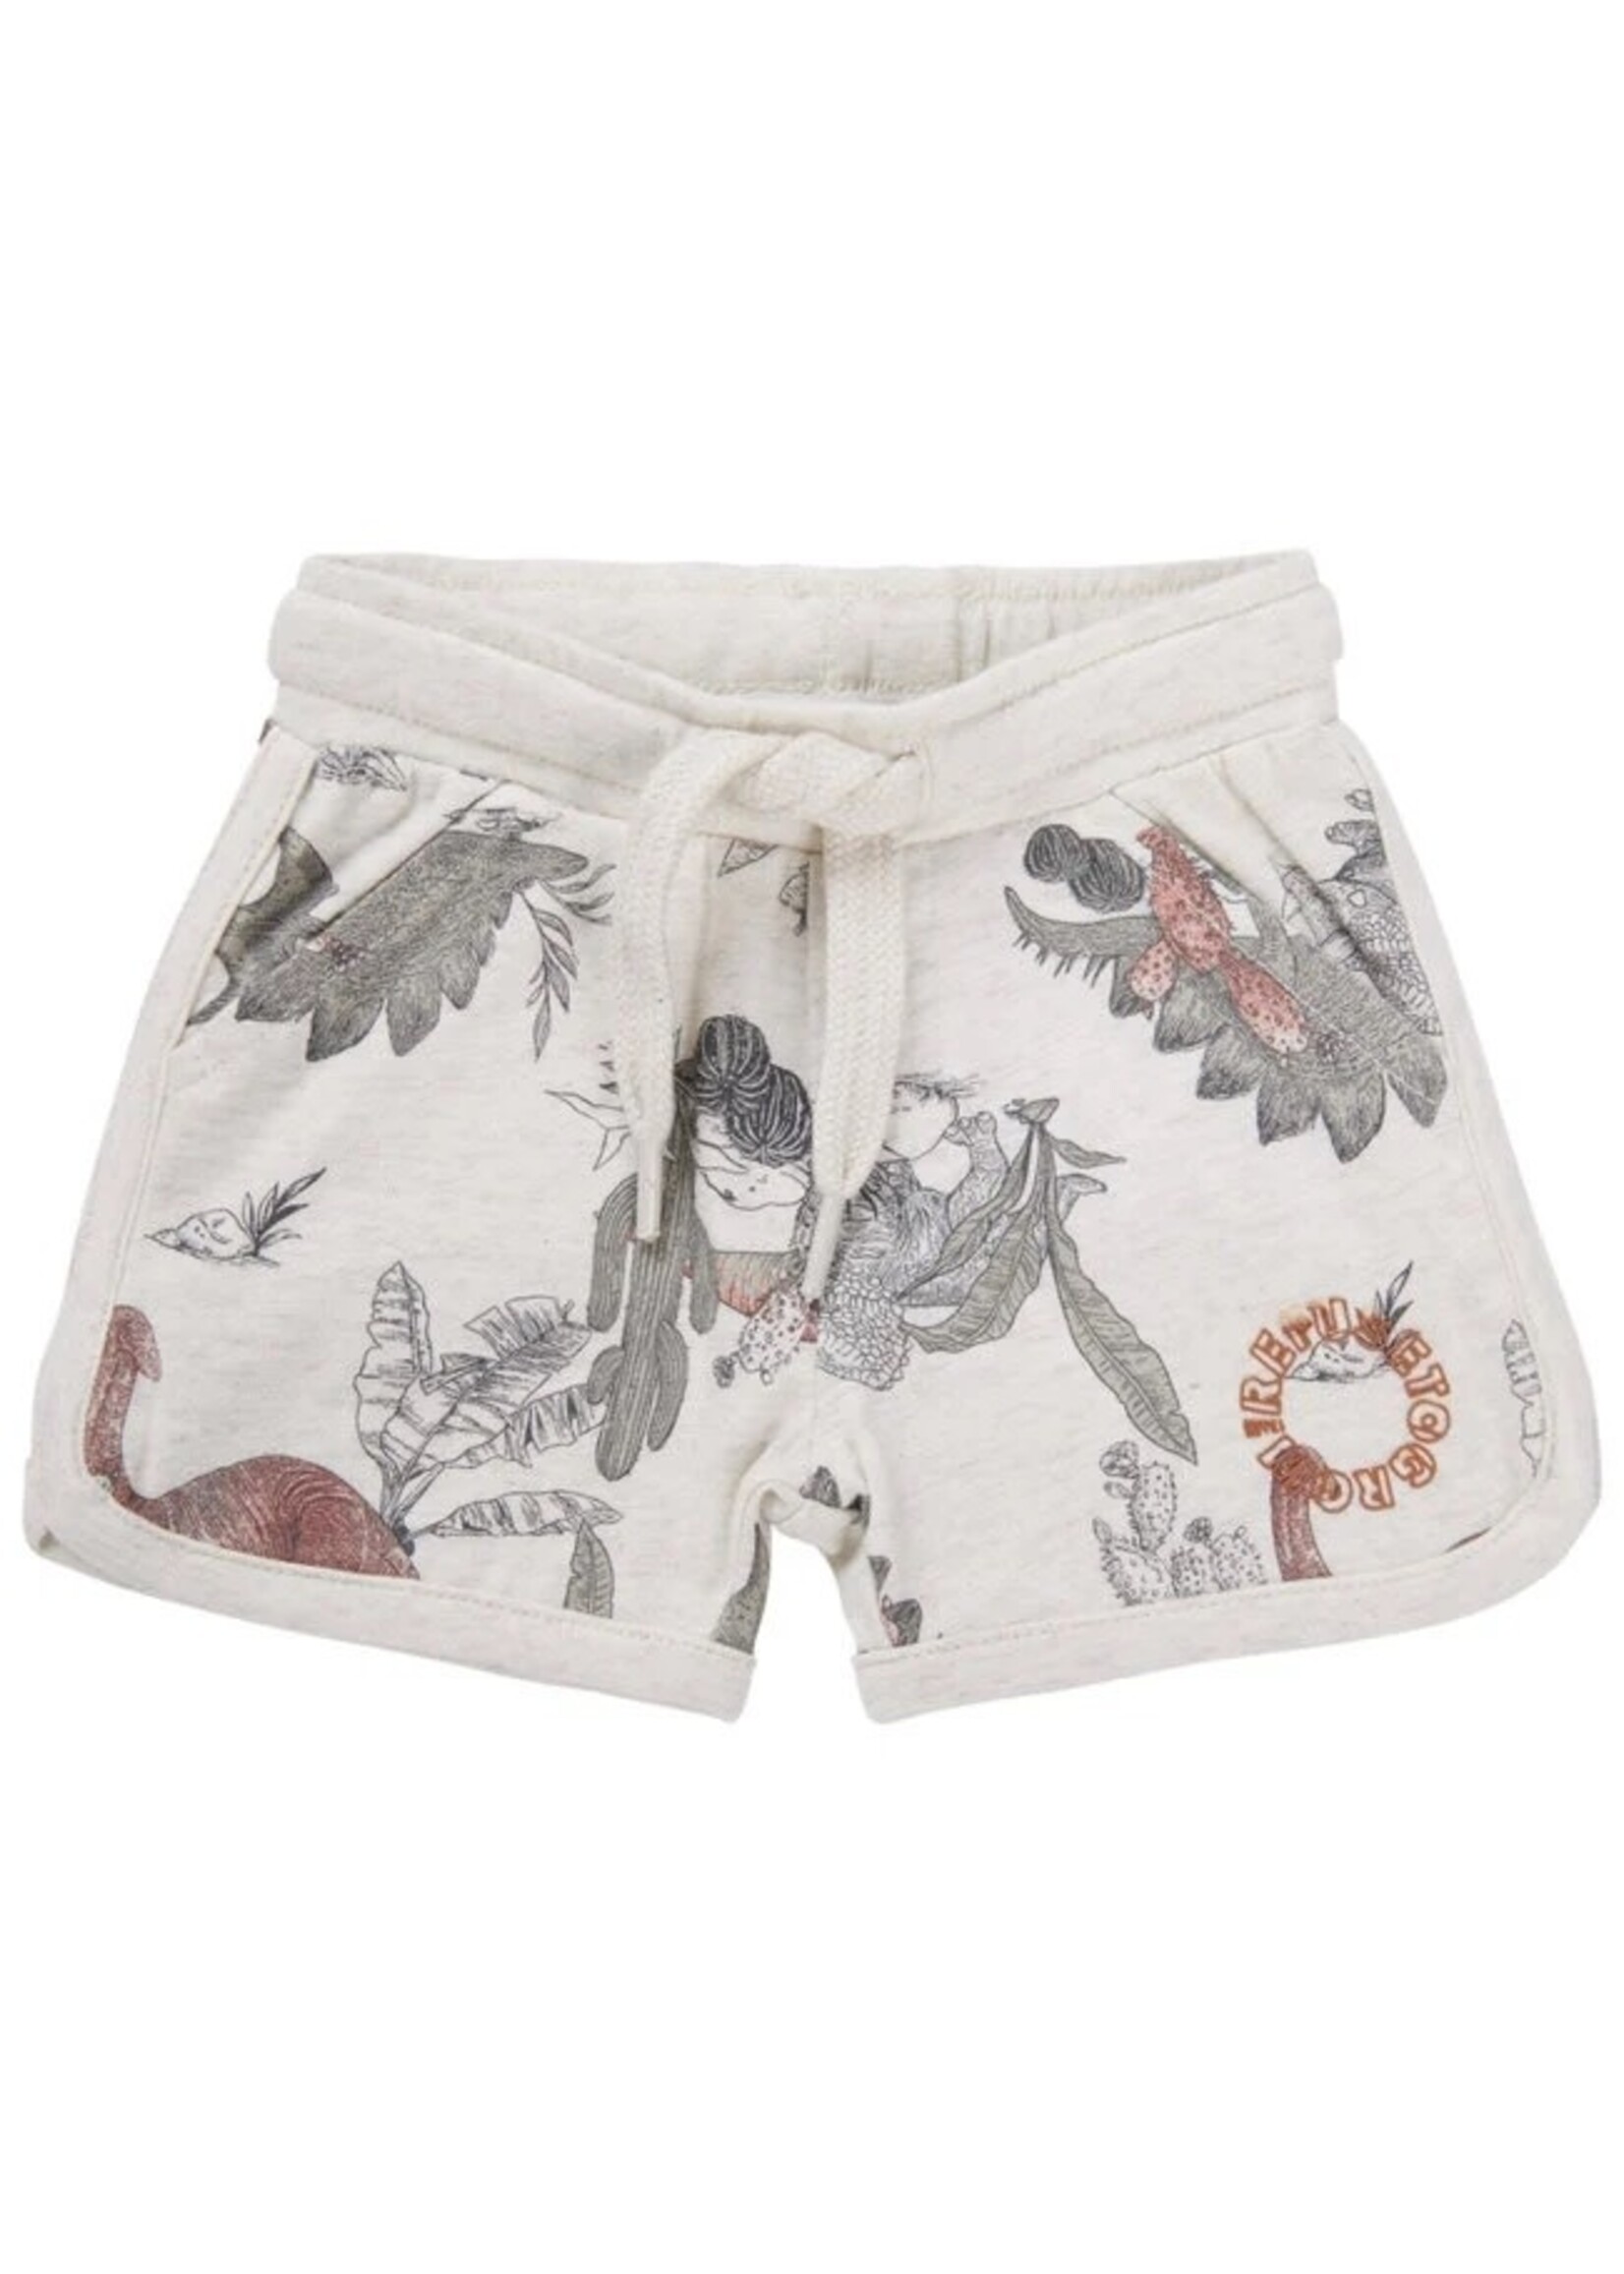 Noppies Noppies-Boys Short Moville all over print